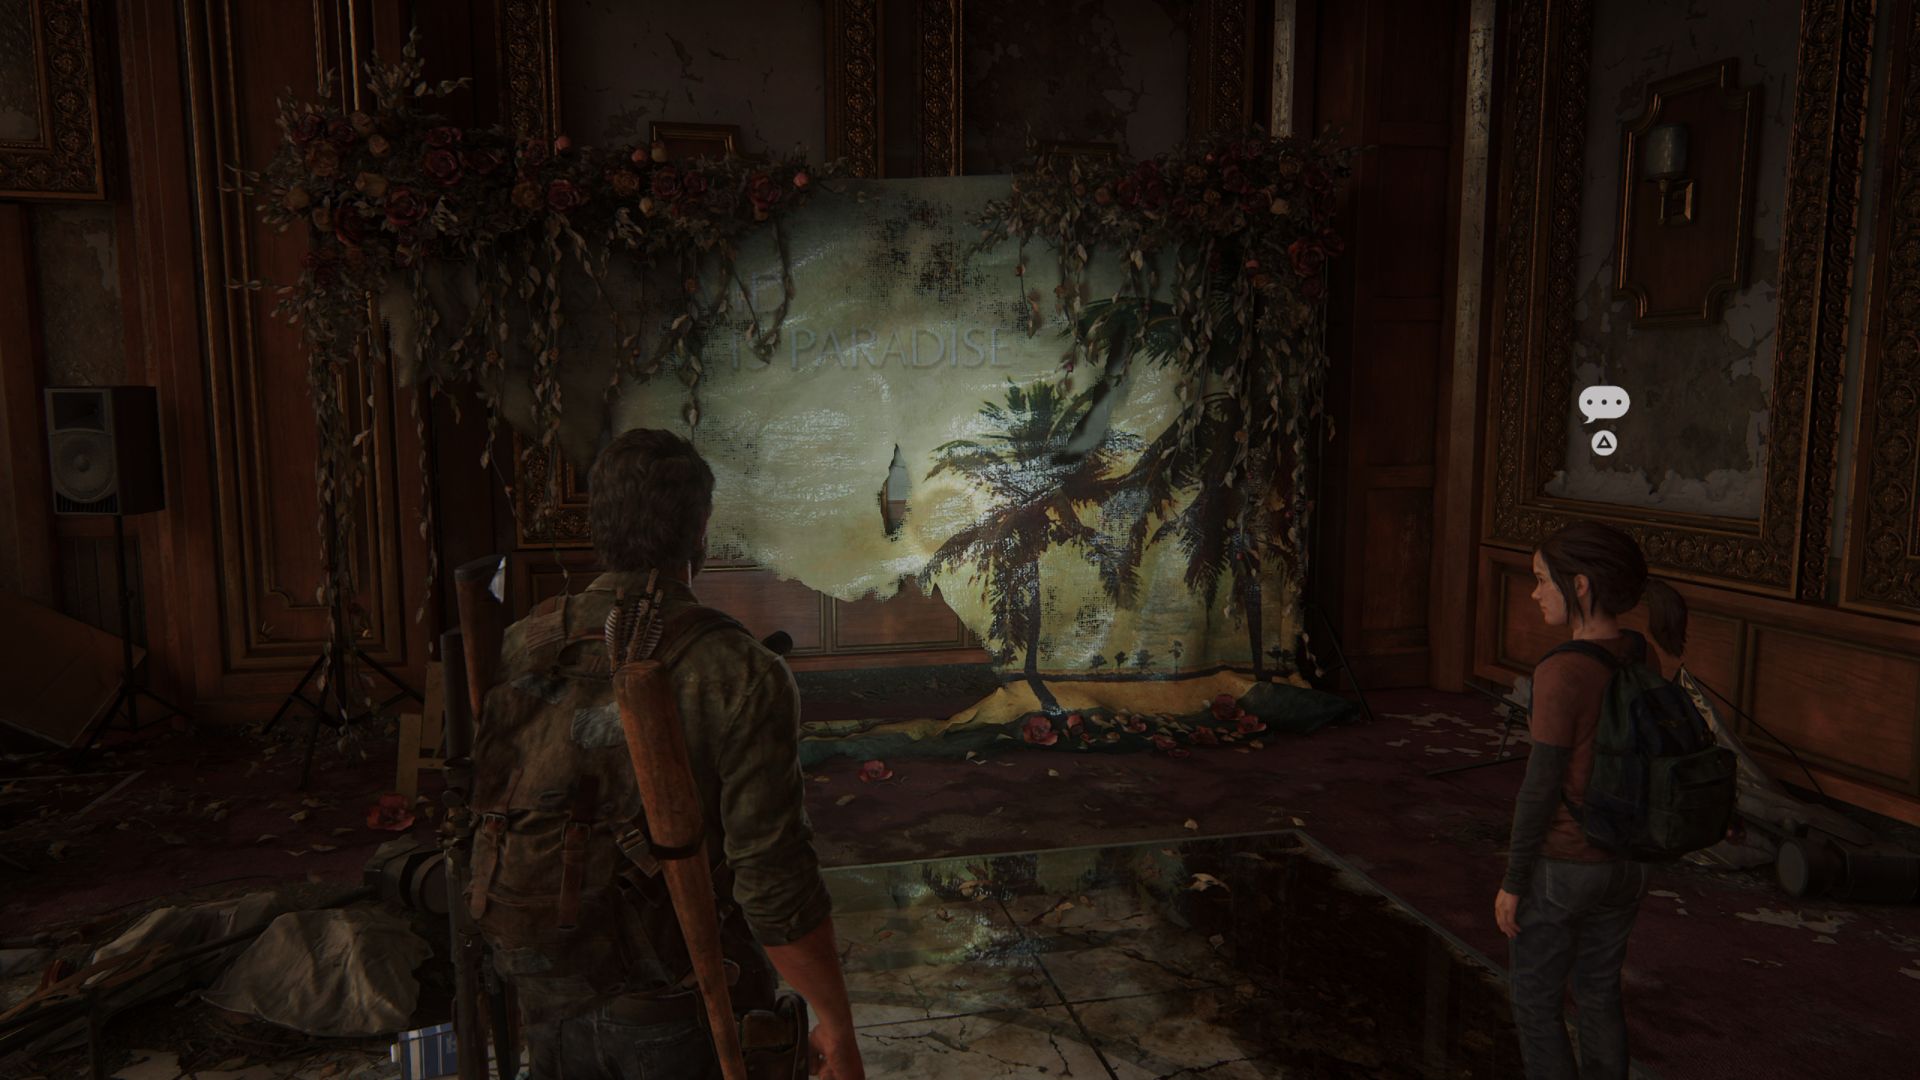 The Last of Us Part 1 Pittsburgh Collectible Locations: Joel can be seen looking at the collectible